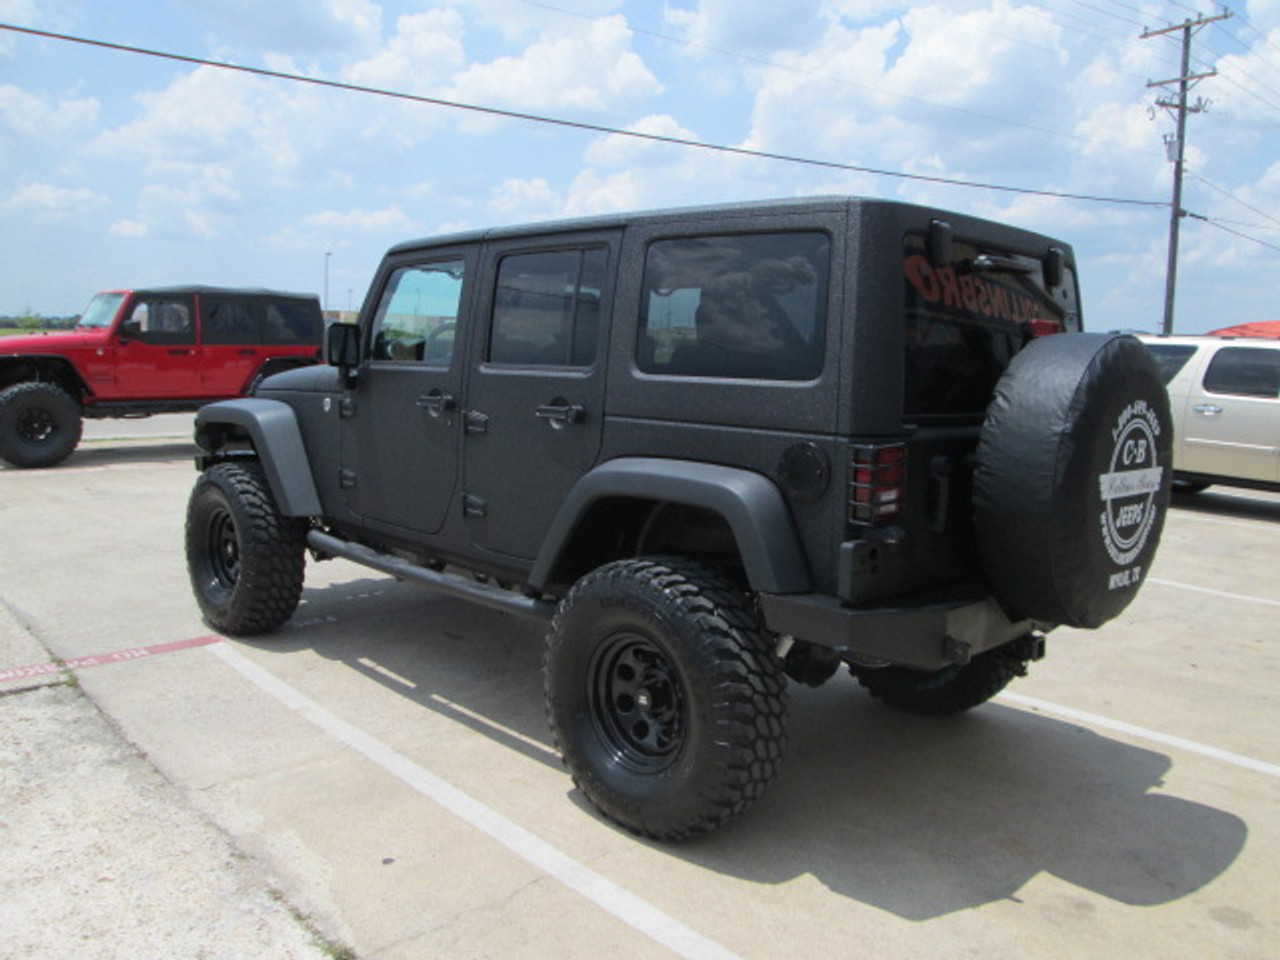 SOLD 2013 Jeep Wrangler Unlimited Rubicon Stock# 694712